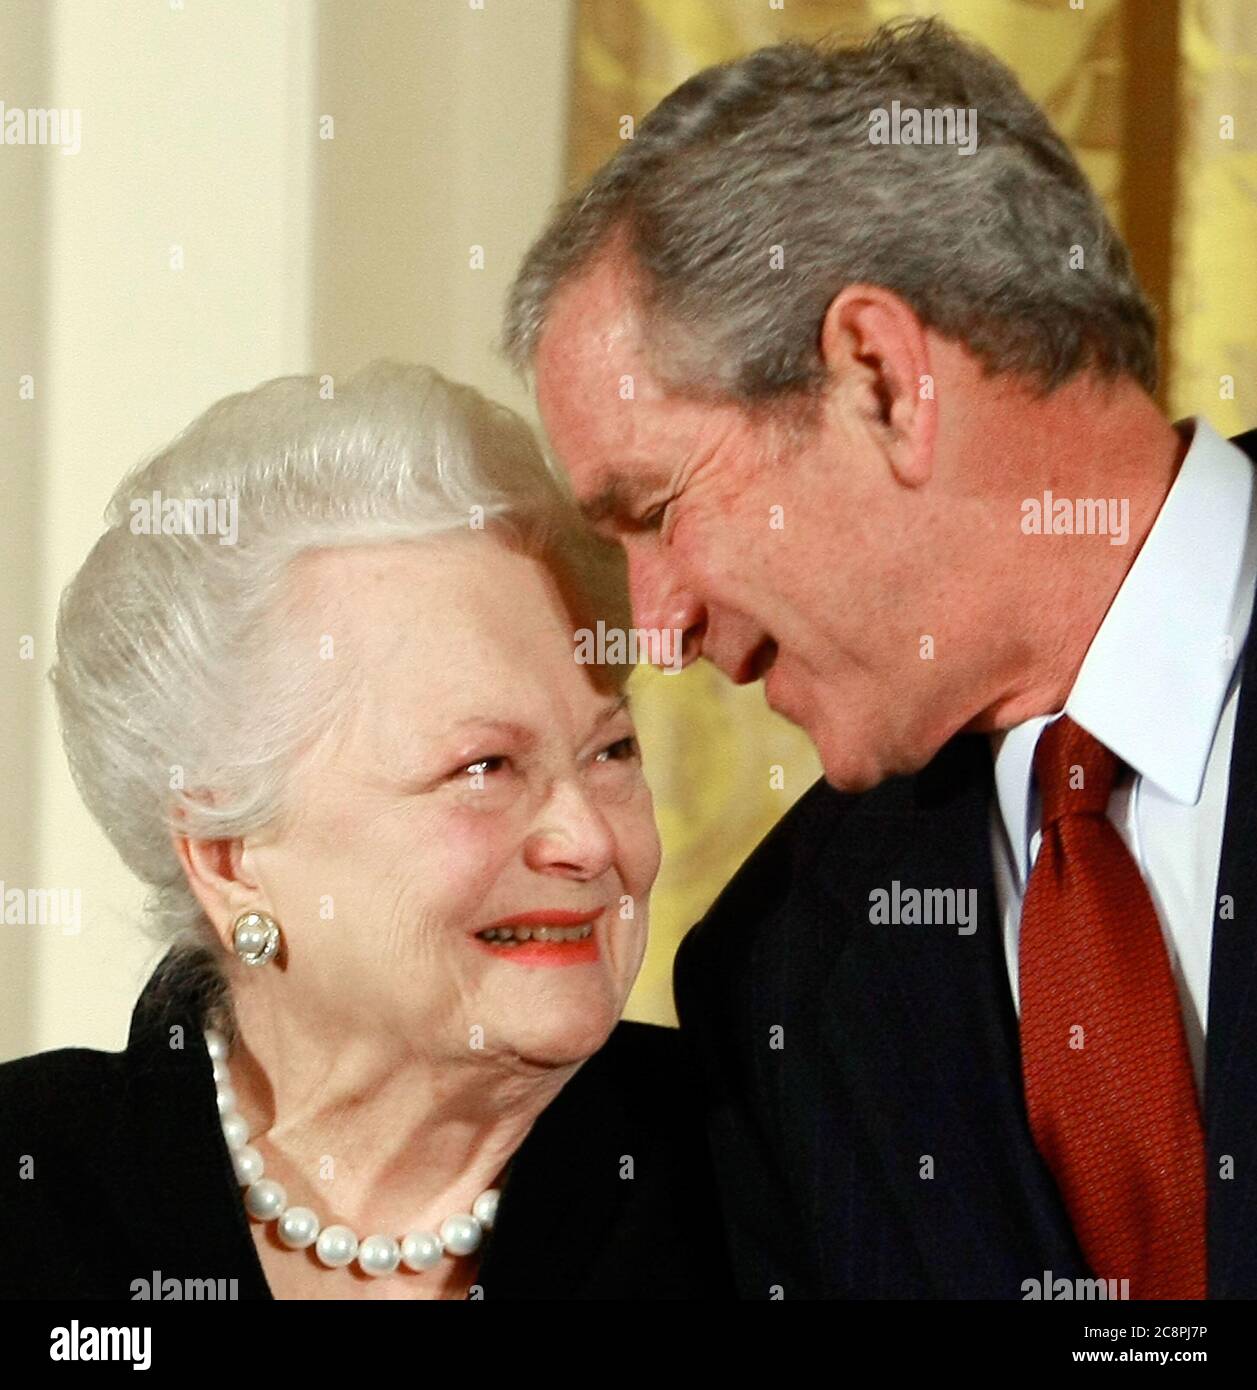 Washington, DC. 17th Nov, 2008. Washington, DC - November 17, 2008 -- United States President George W. Bush congratulates actress Olivia de Havilland before presenting her with the 2008 National Medals of Arts award during an event in the East Room at the White House on Monday, November 17, 2008 in Washington, DC. During the event president Bush presented recipients with awards for the National Medals of Arts and the National Humanities Medal. Credit: Mark Wilson - Pool via CNP | usage worldwide Credit: dpa/Alamy Live News Stock Photo